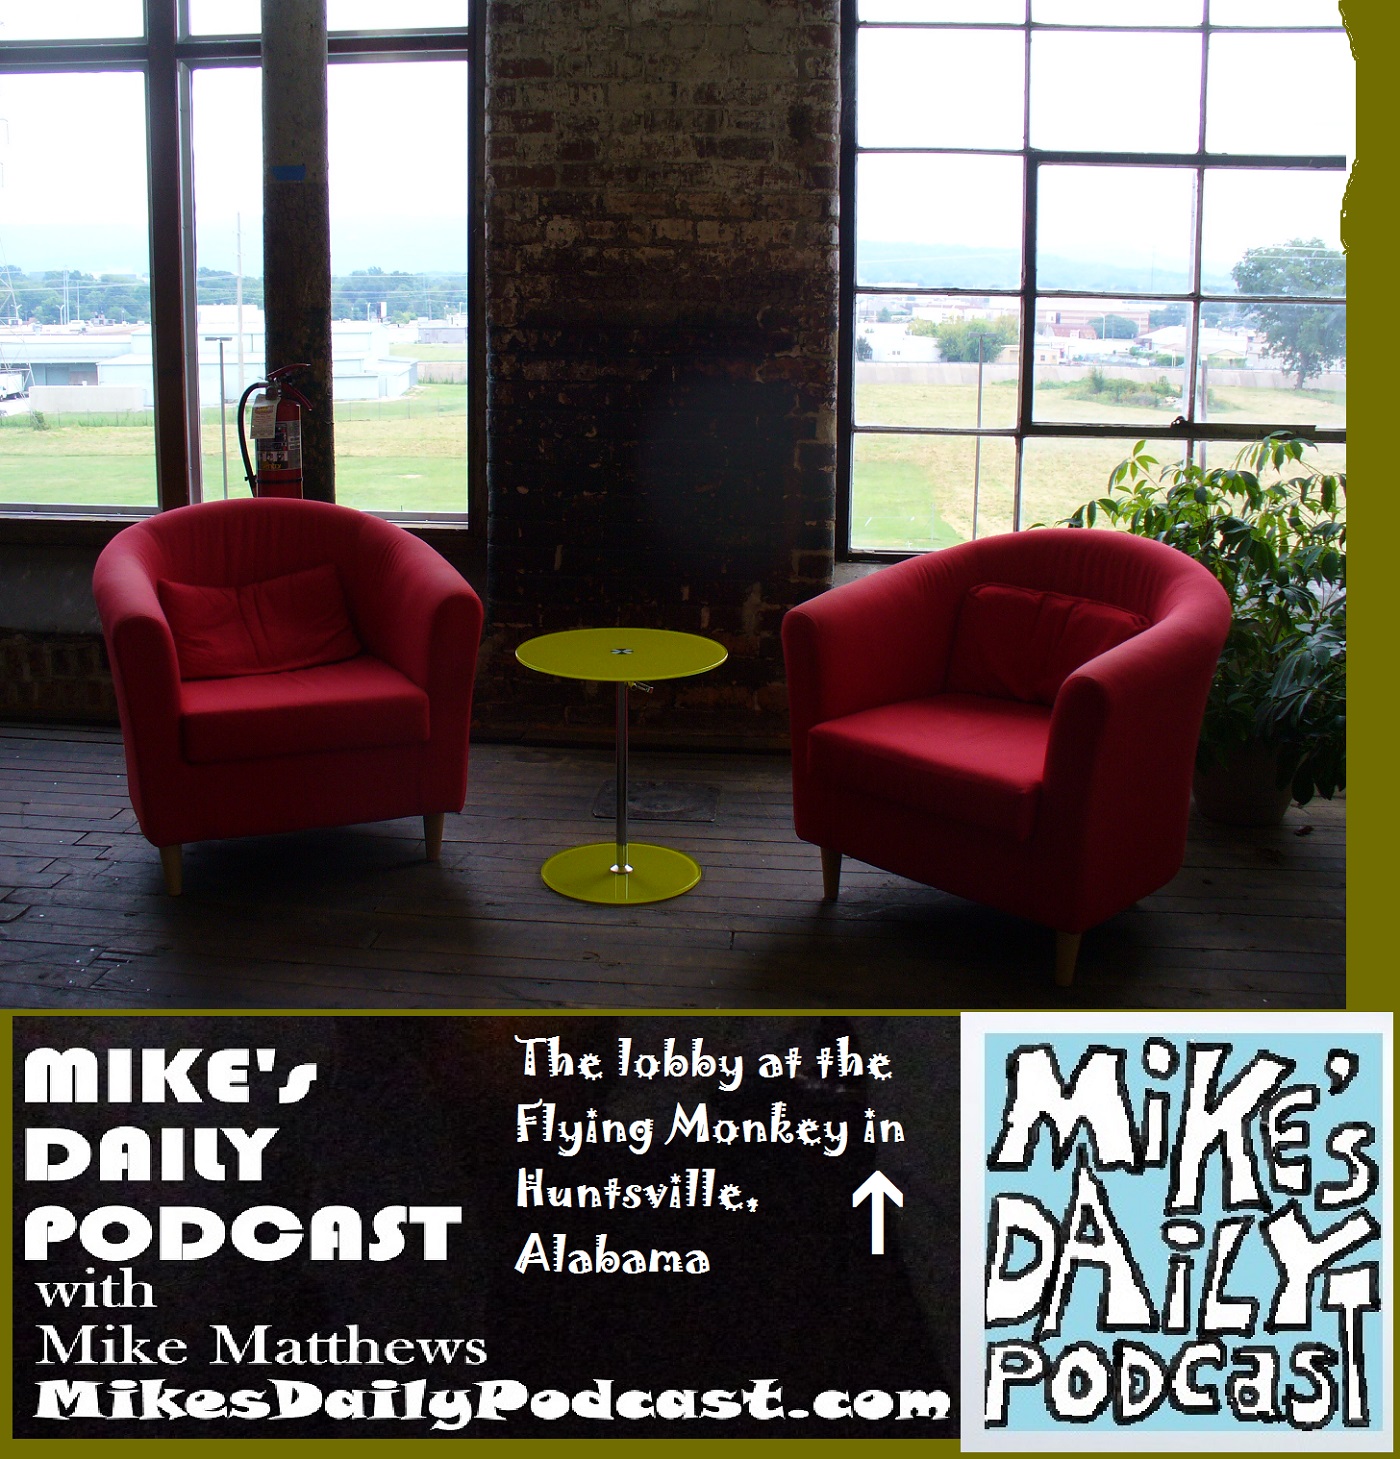 mikes-daily-podcast-1204-the-flying-monkey-huntsville-al